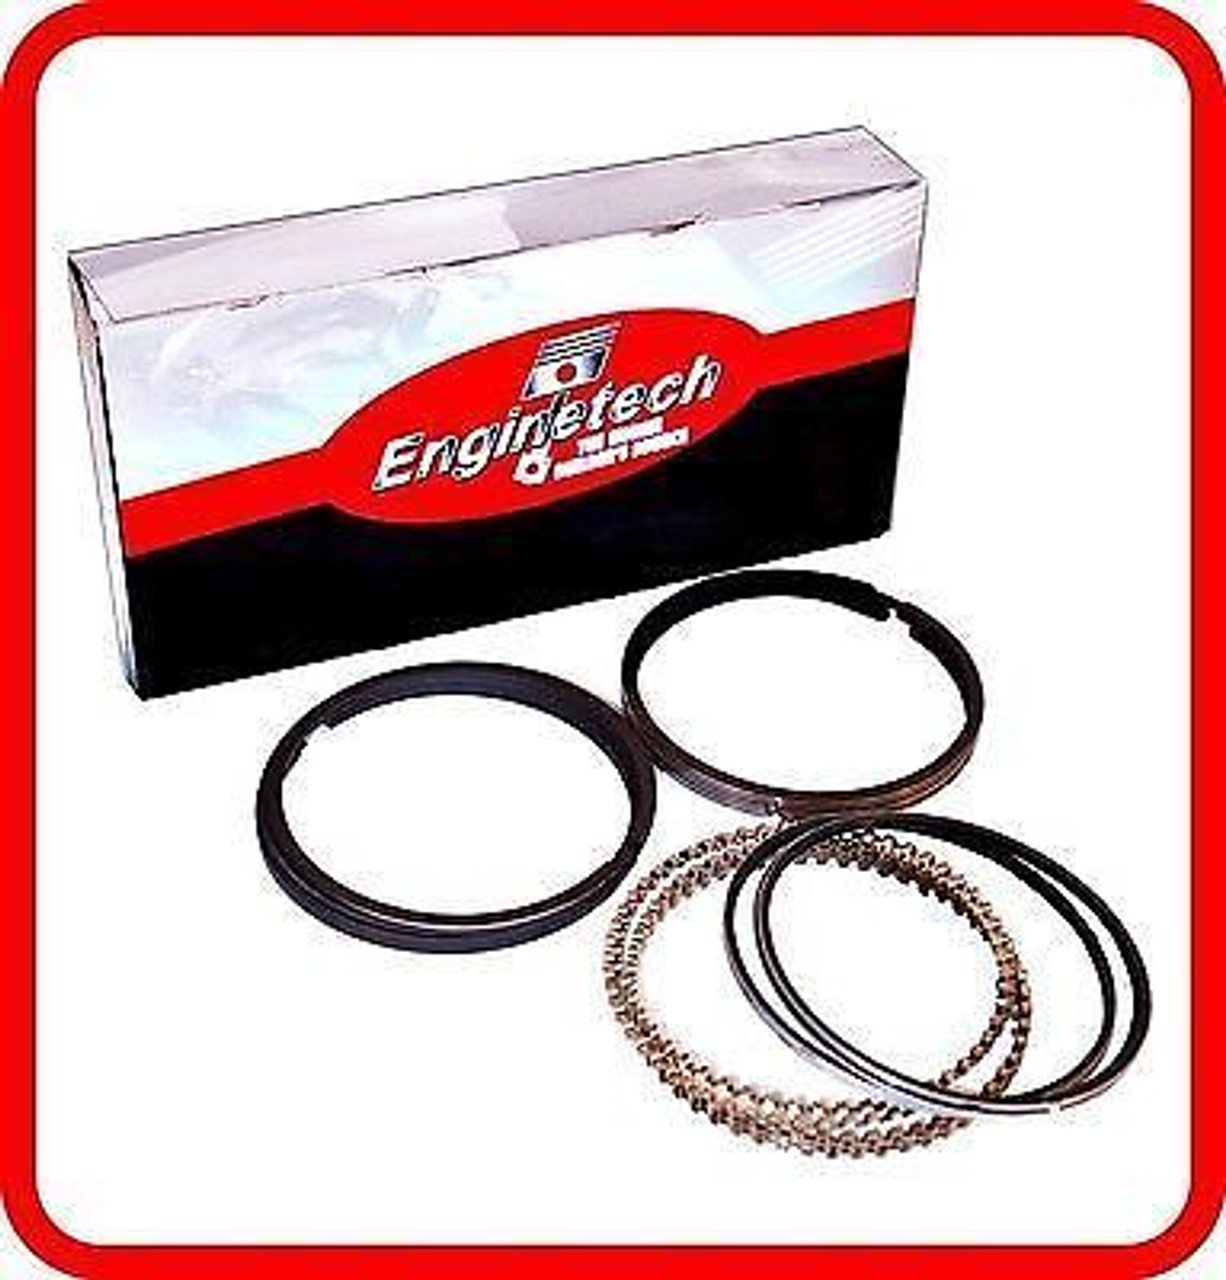 1987 Plymouth Caravelle 2.2L Engine Piston Ring Set C87504 -628